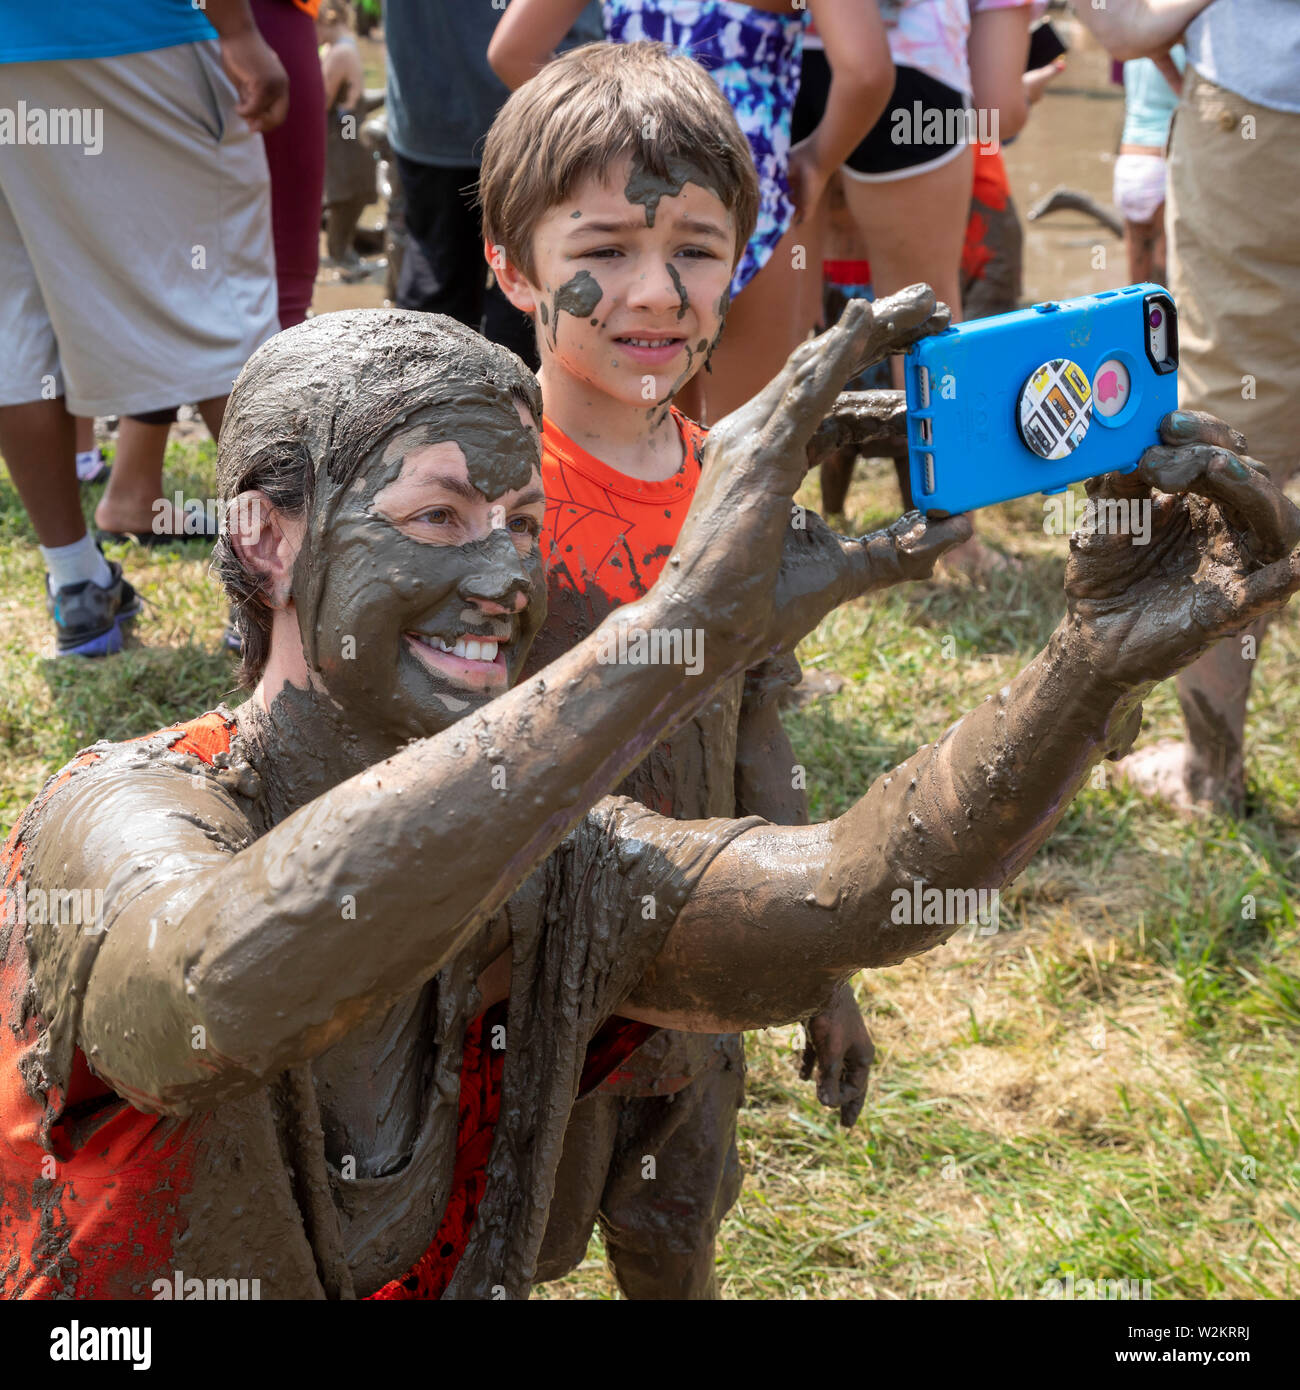 Westland, Michigan - Children age 12 and younger, along with some parents, play in the mud during the annual 'Youth Mud Day' organized by Wayne County Stock Photo